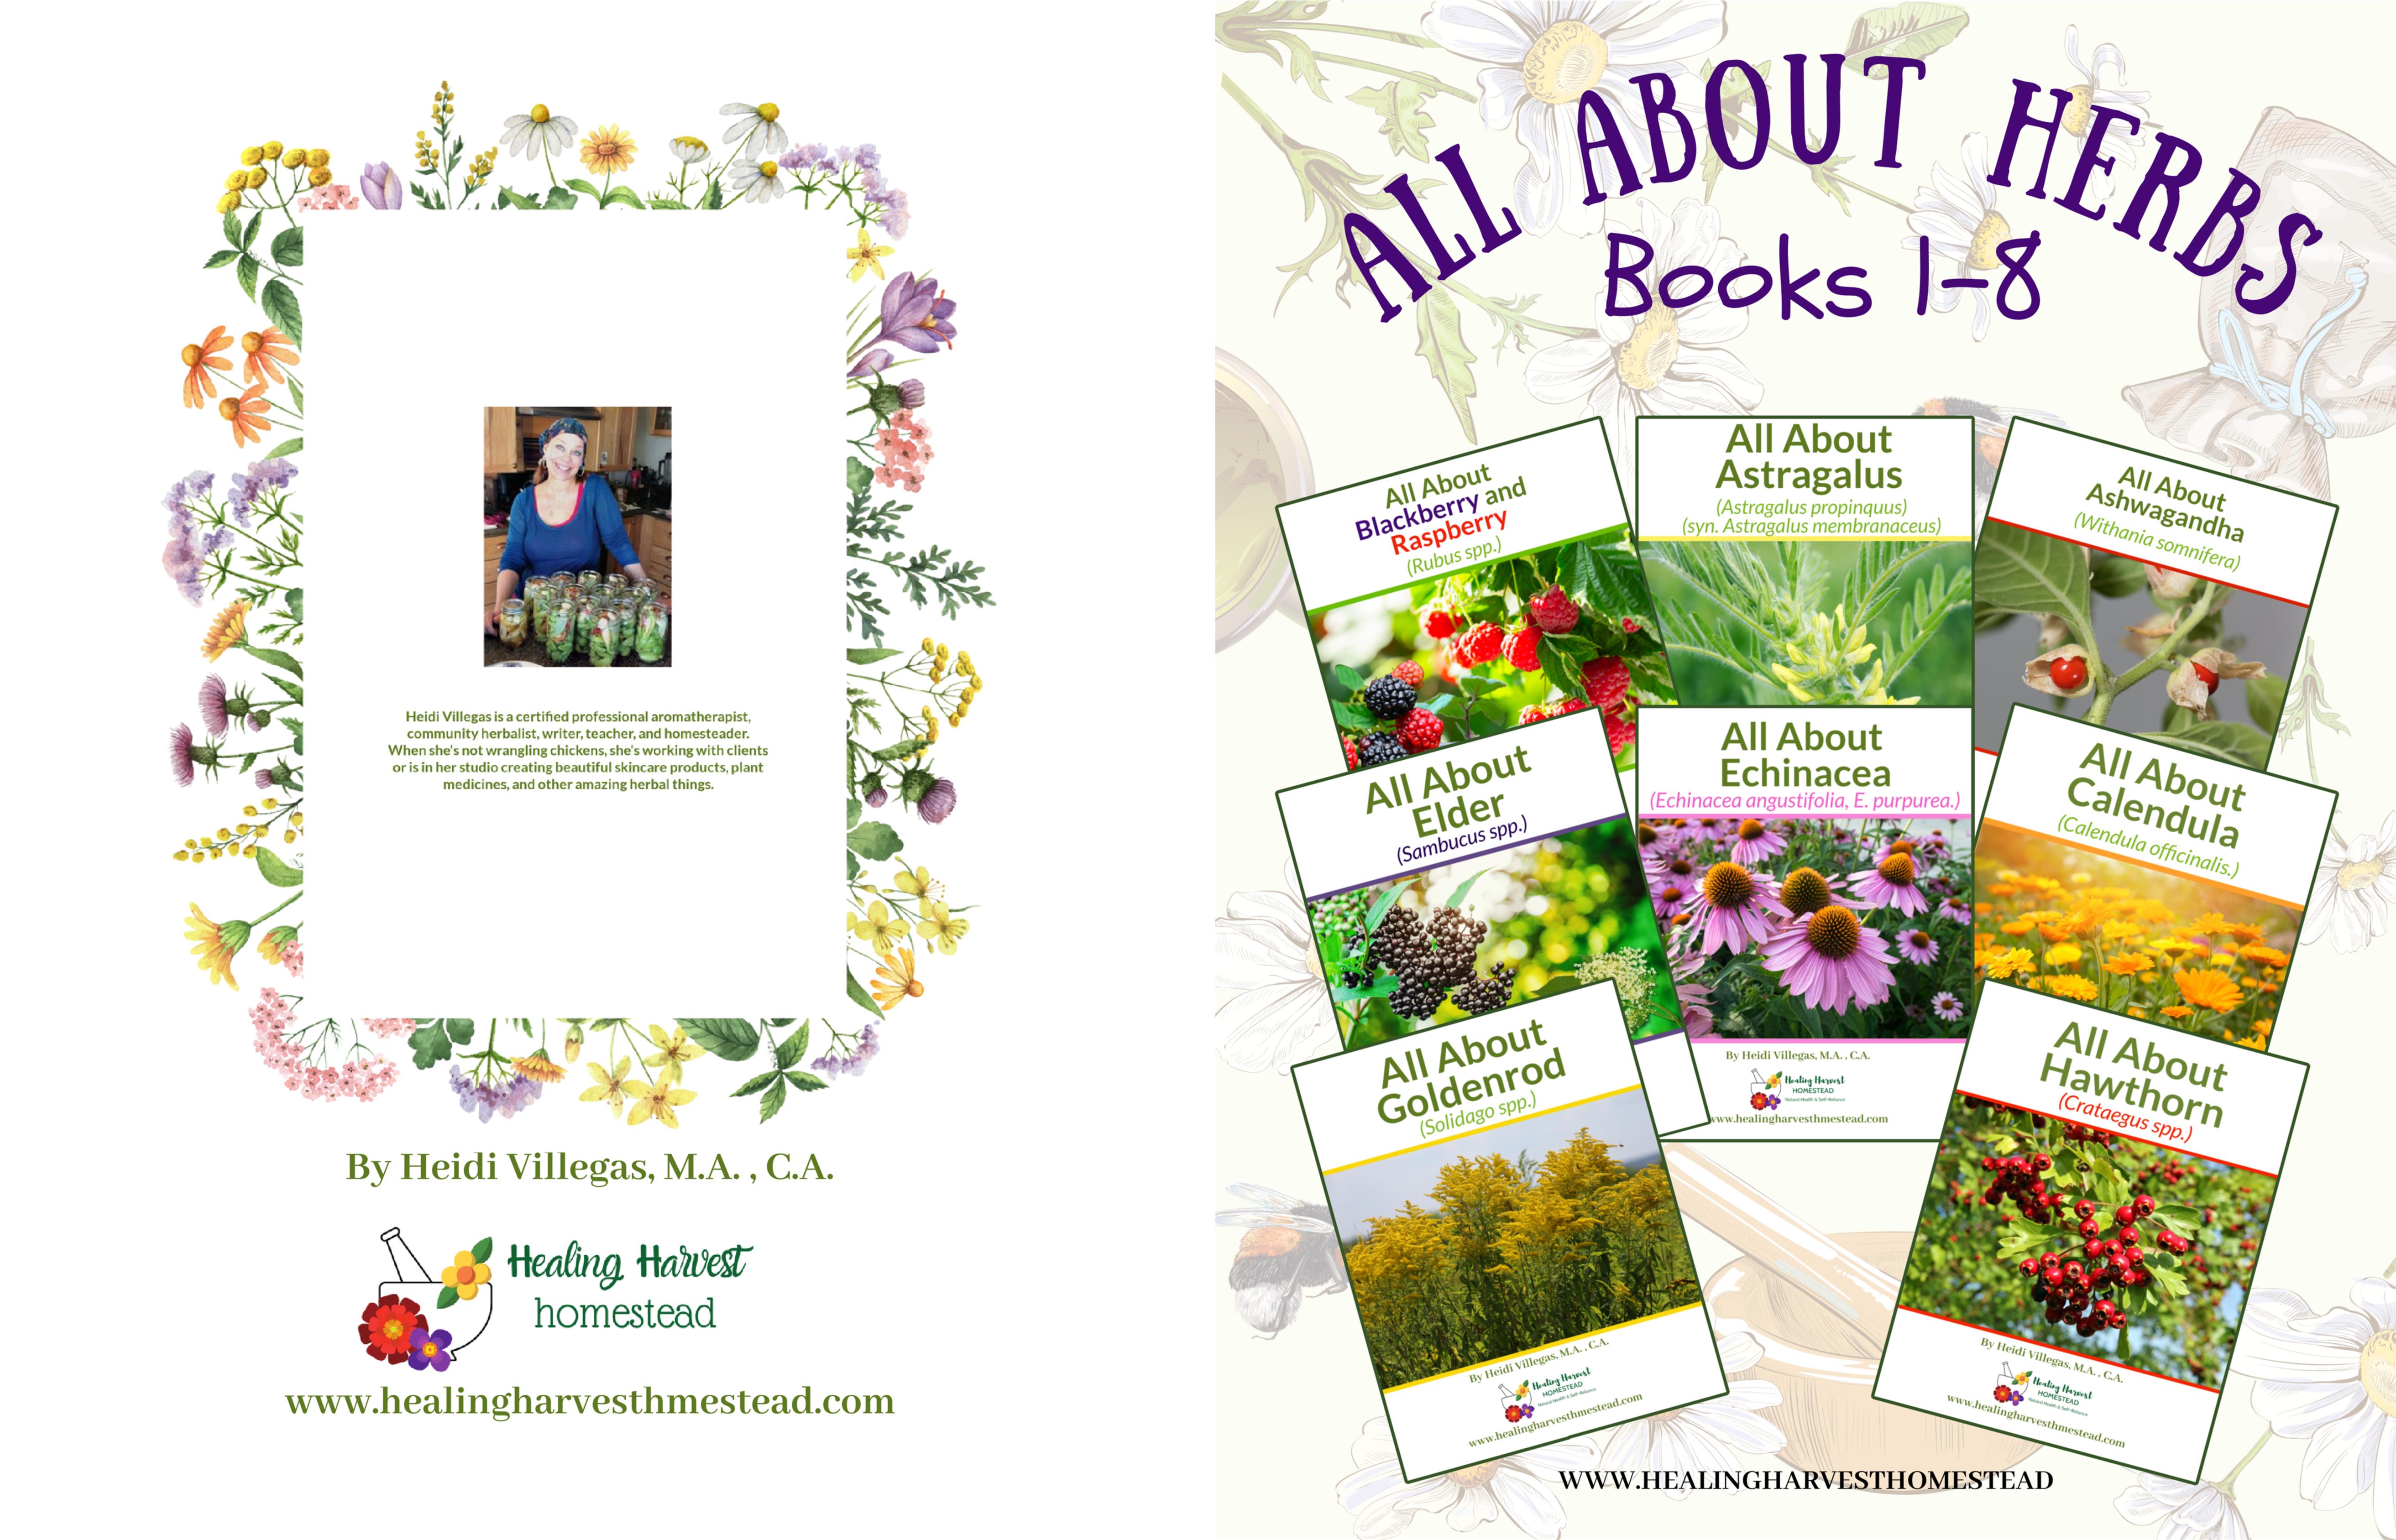  All About Herbs Books 1-8 cover image